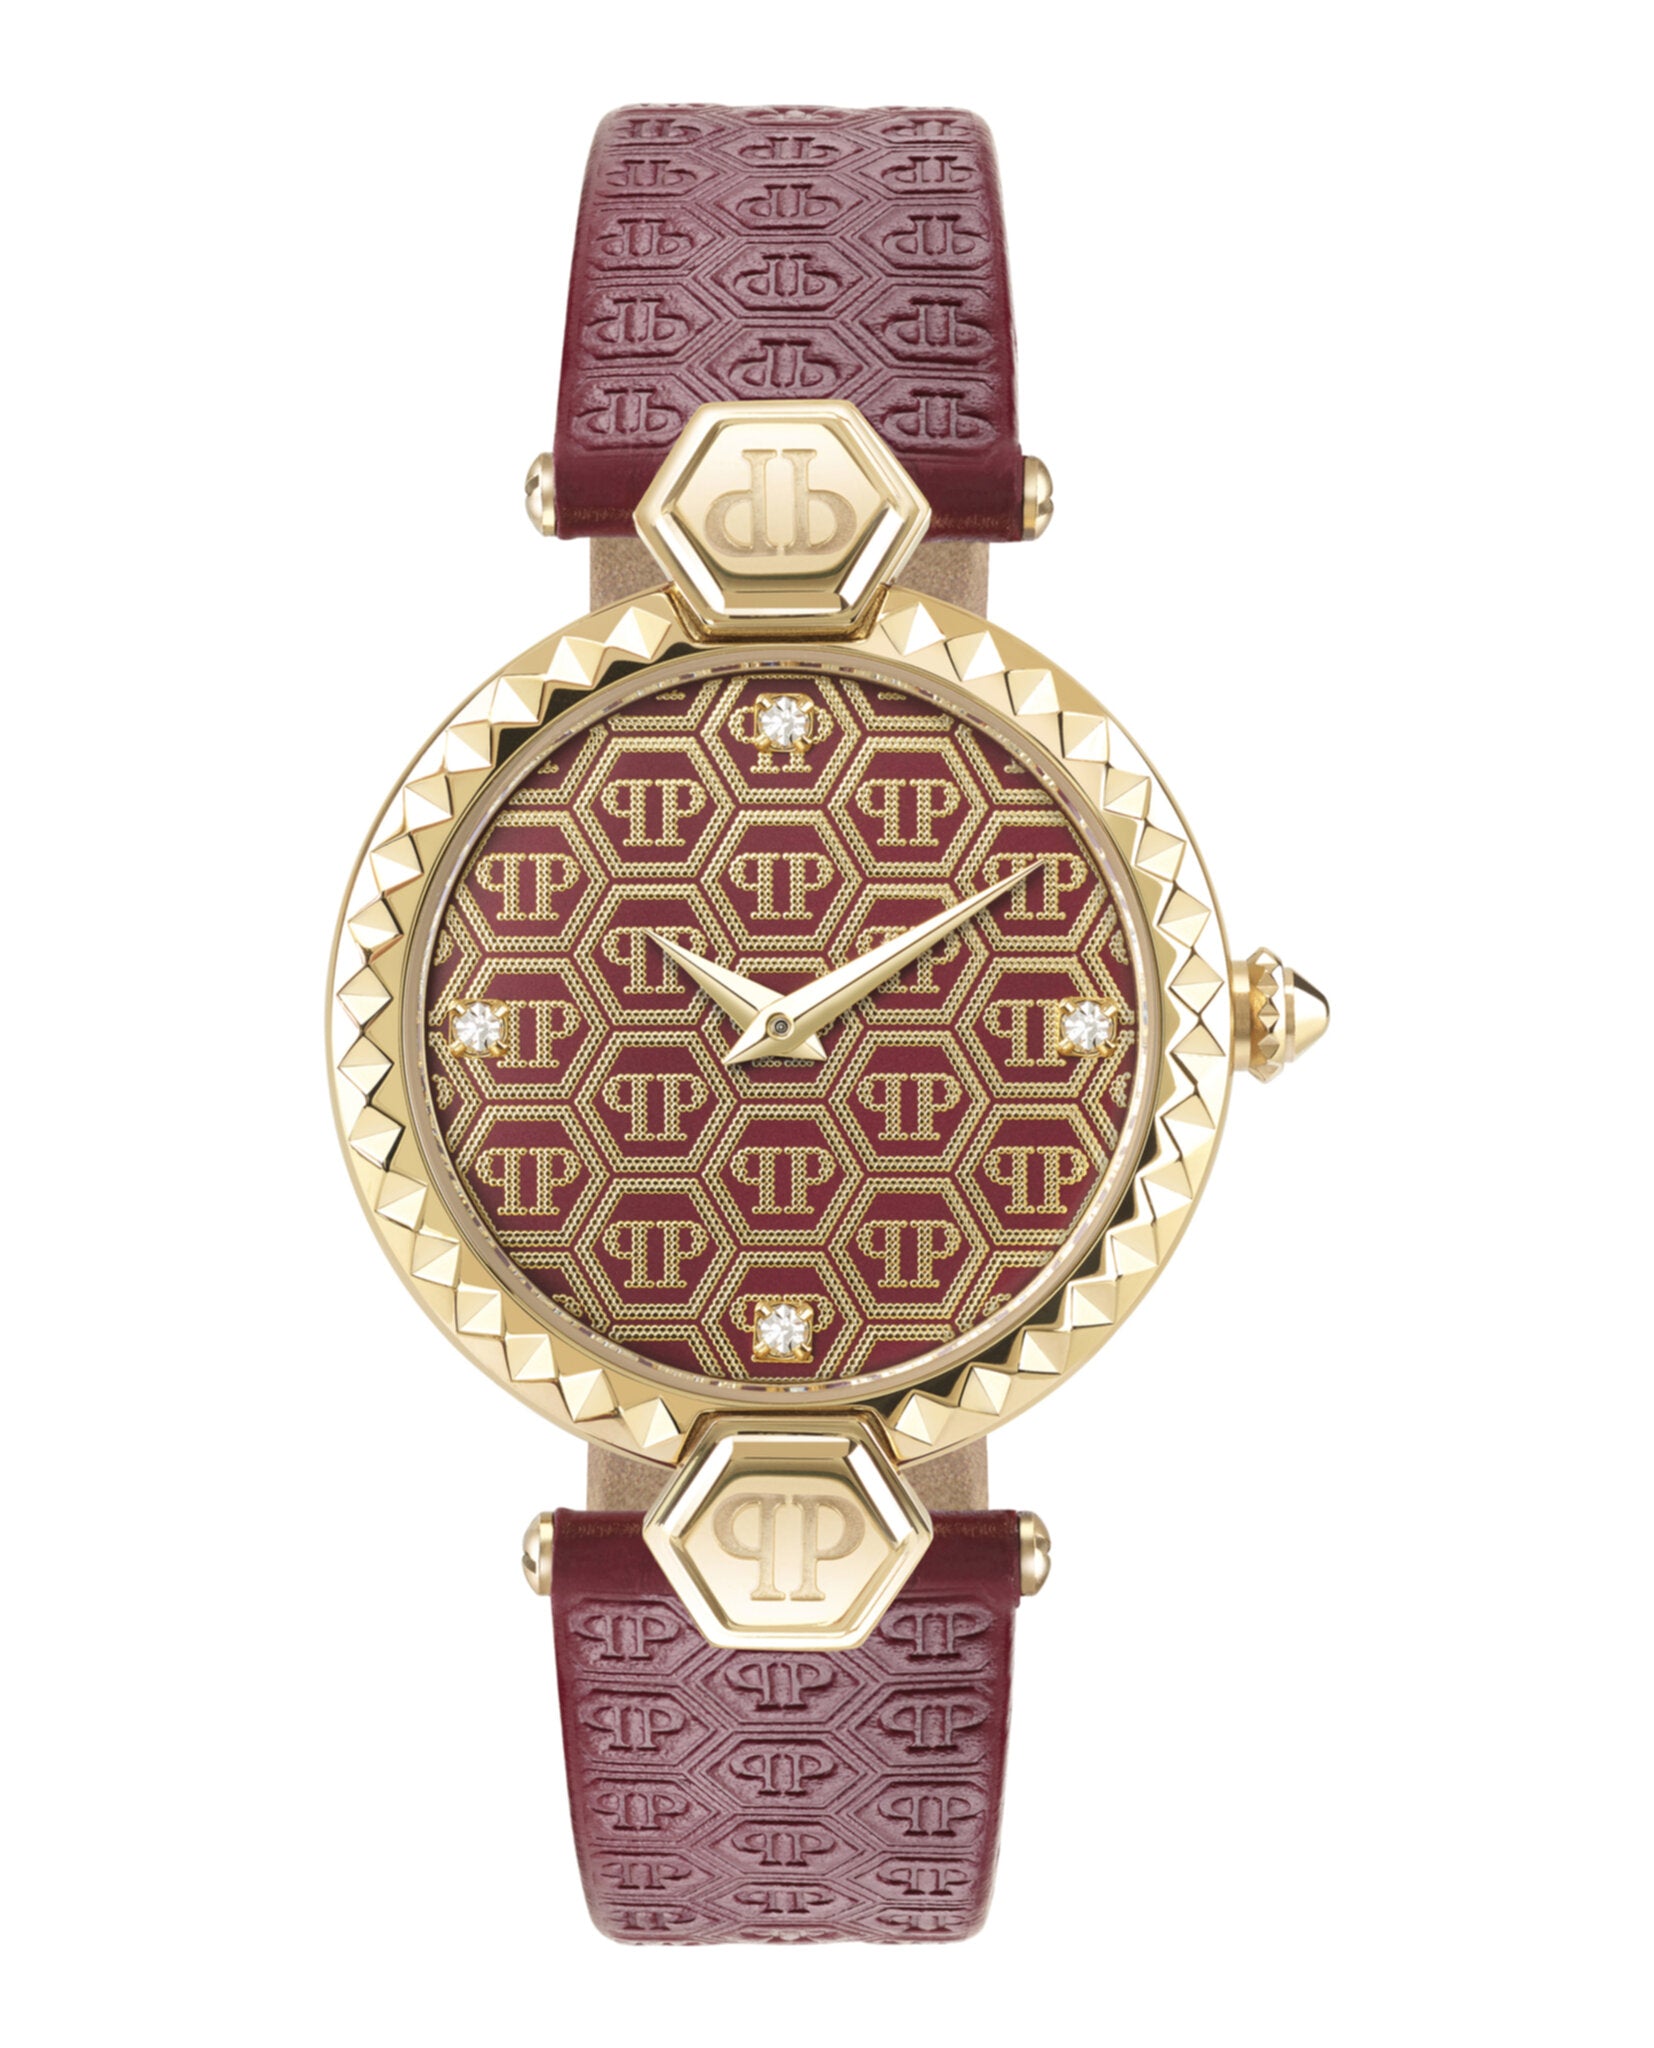 Plein Couture Leather Watch